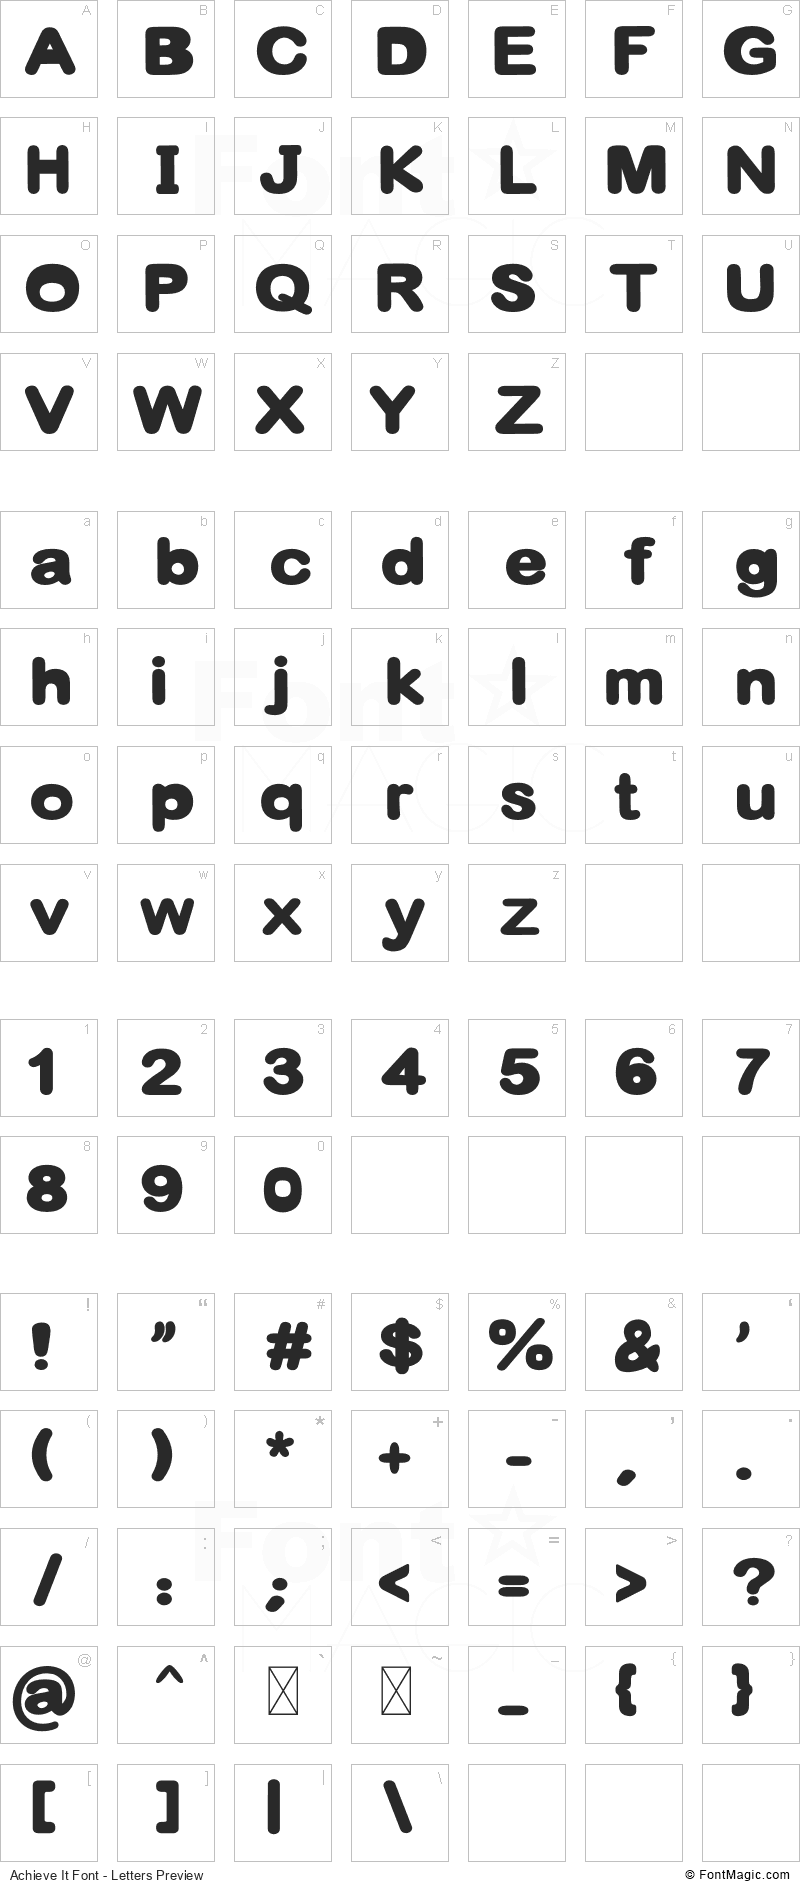 Achieve It Font - All Latters Preview Chart